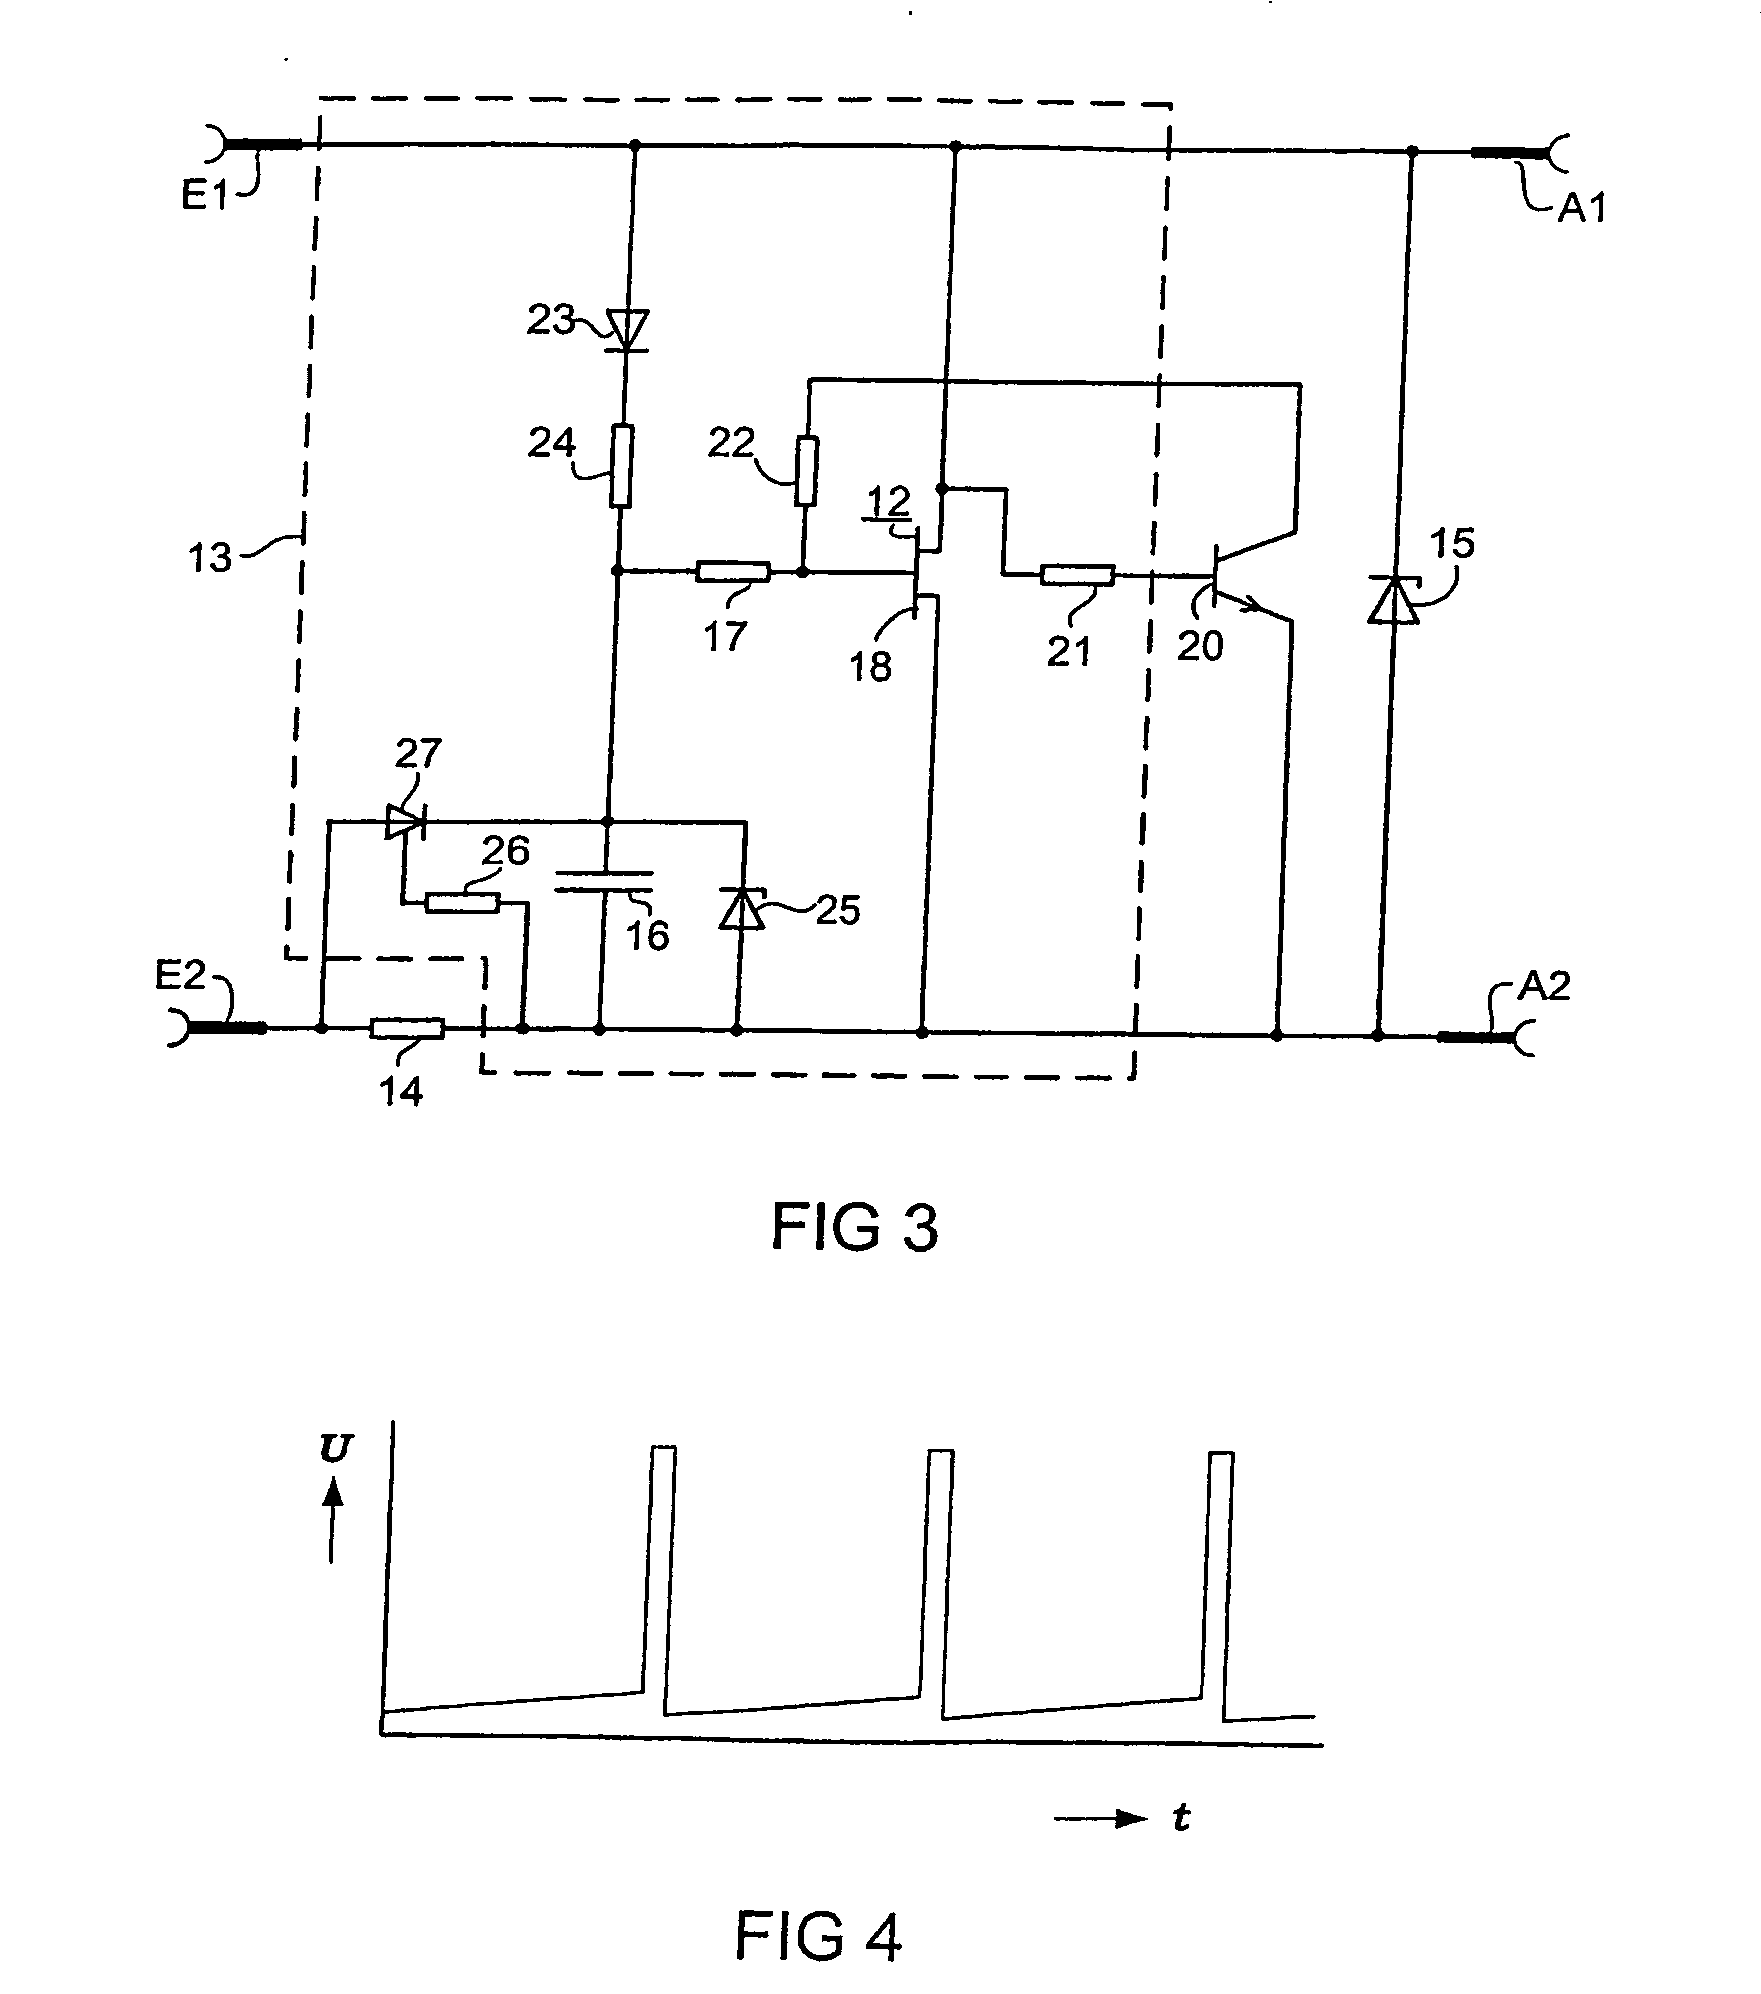 Analogue electronic trip device for an electrical power breaker responding to a short-circuit